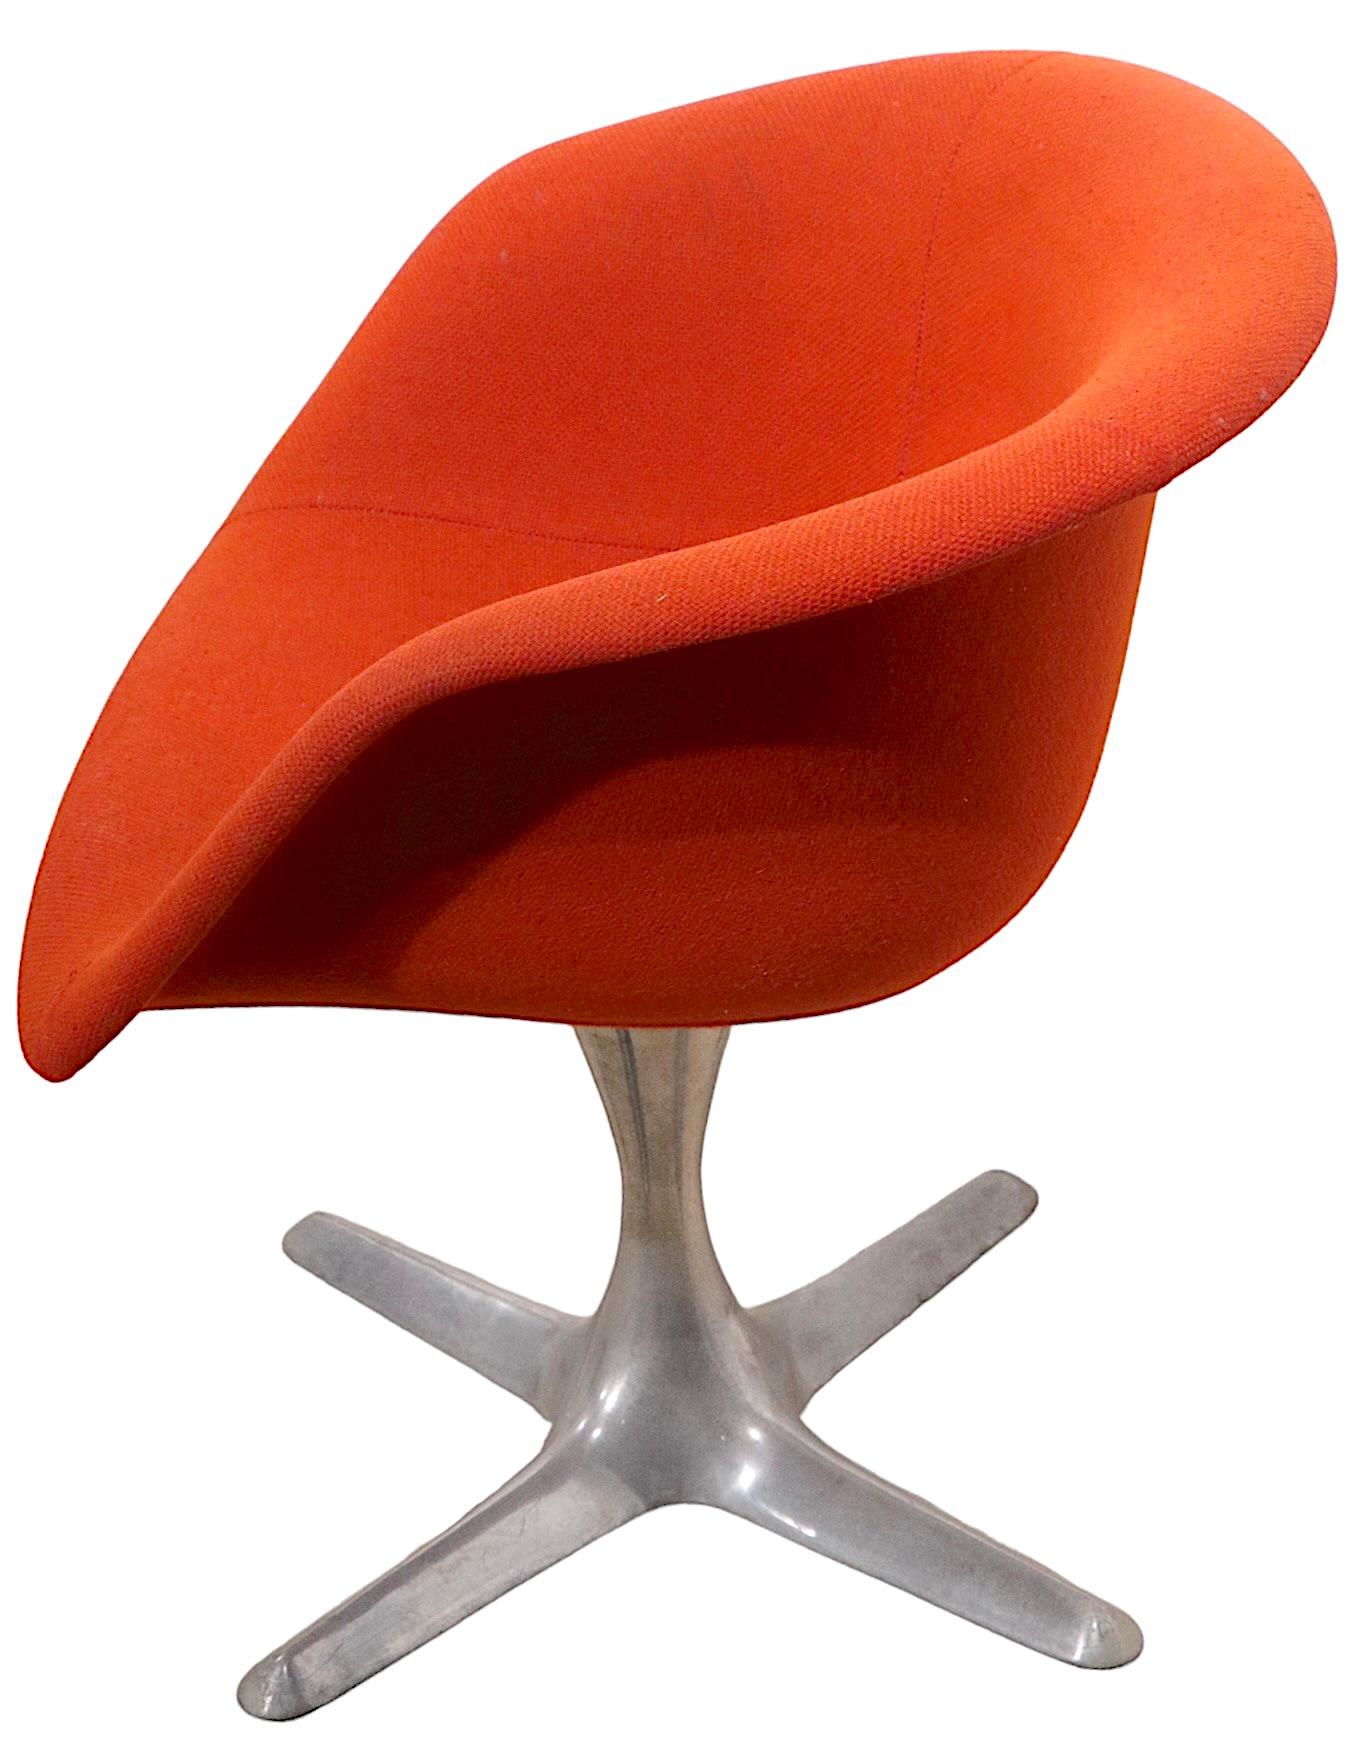 American Pr. Swivel Chairs by Hugh Acton for Burke Acton, circa 1960s For Sale